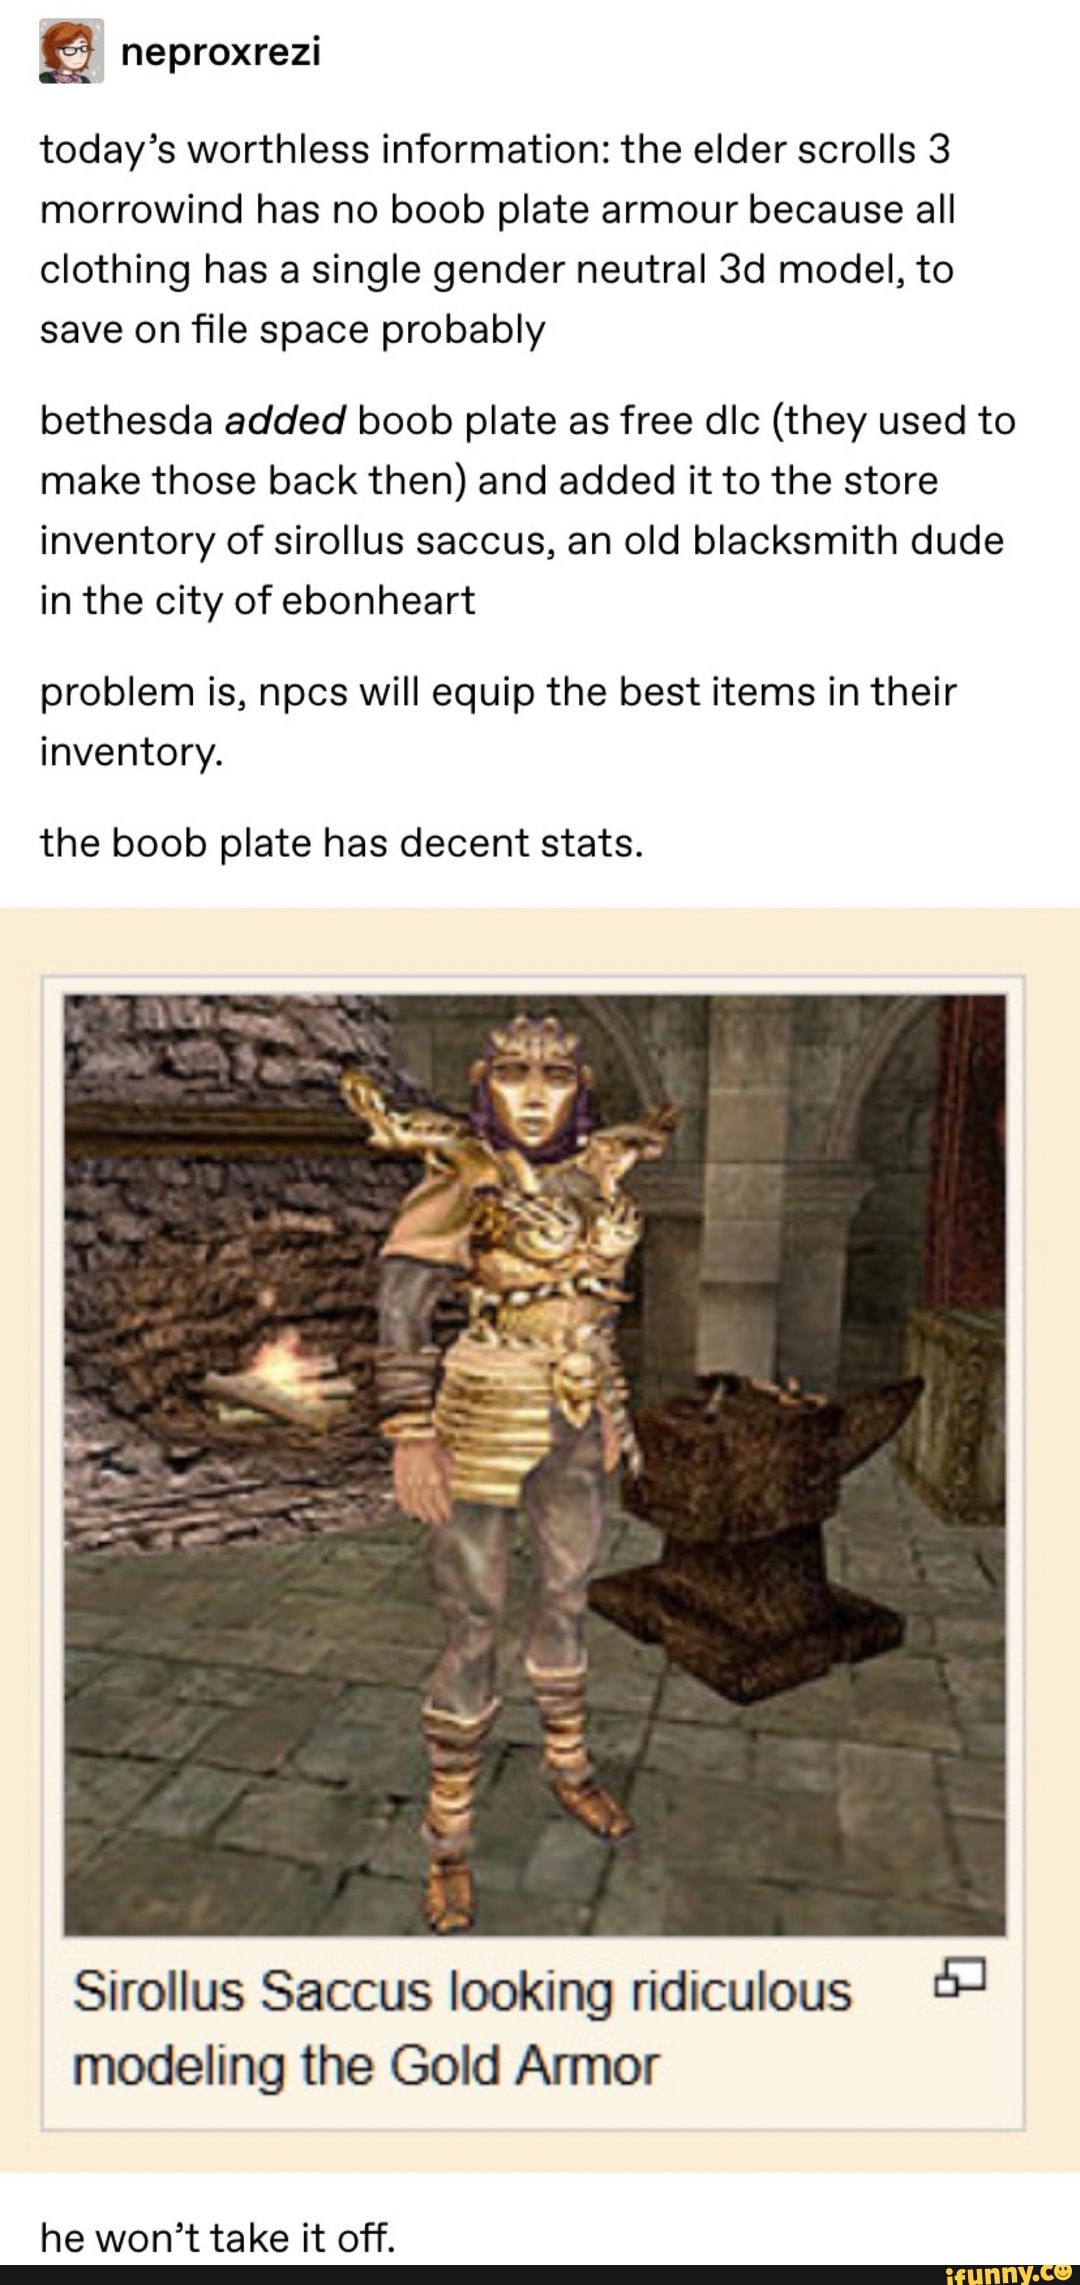 vounoura NPCs in Morrowind before u bribe them for approval: trying to heal  .. please donate to my go fund me $10 will make me less racist  $100 will make me